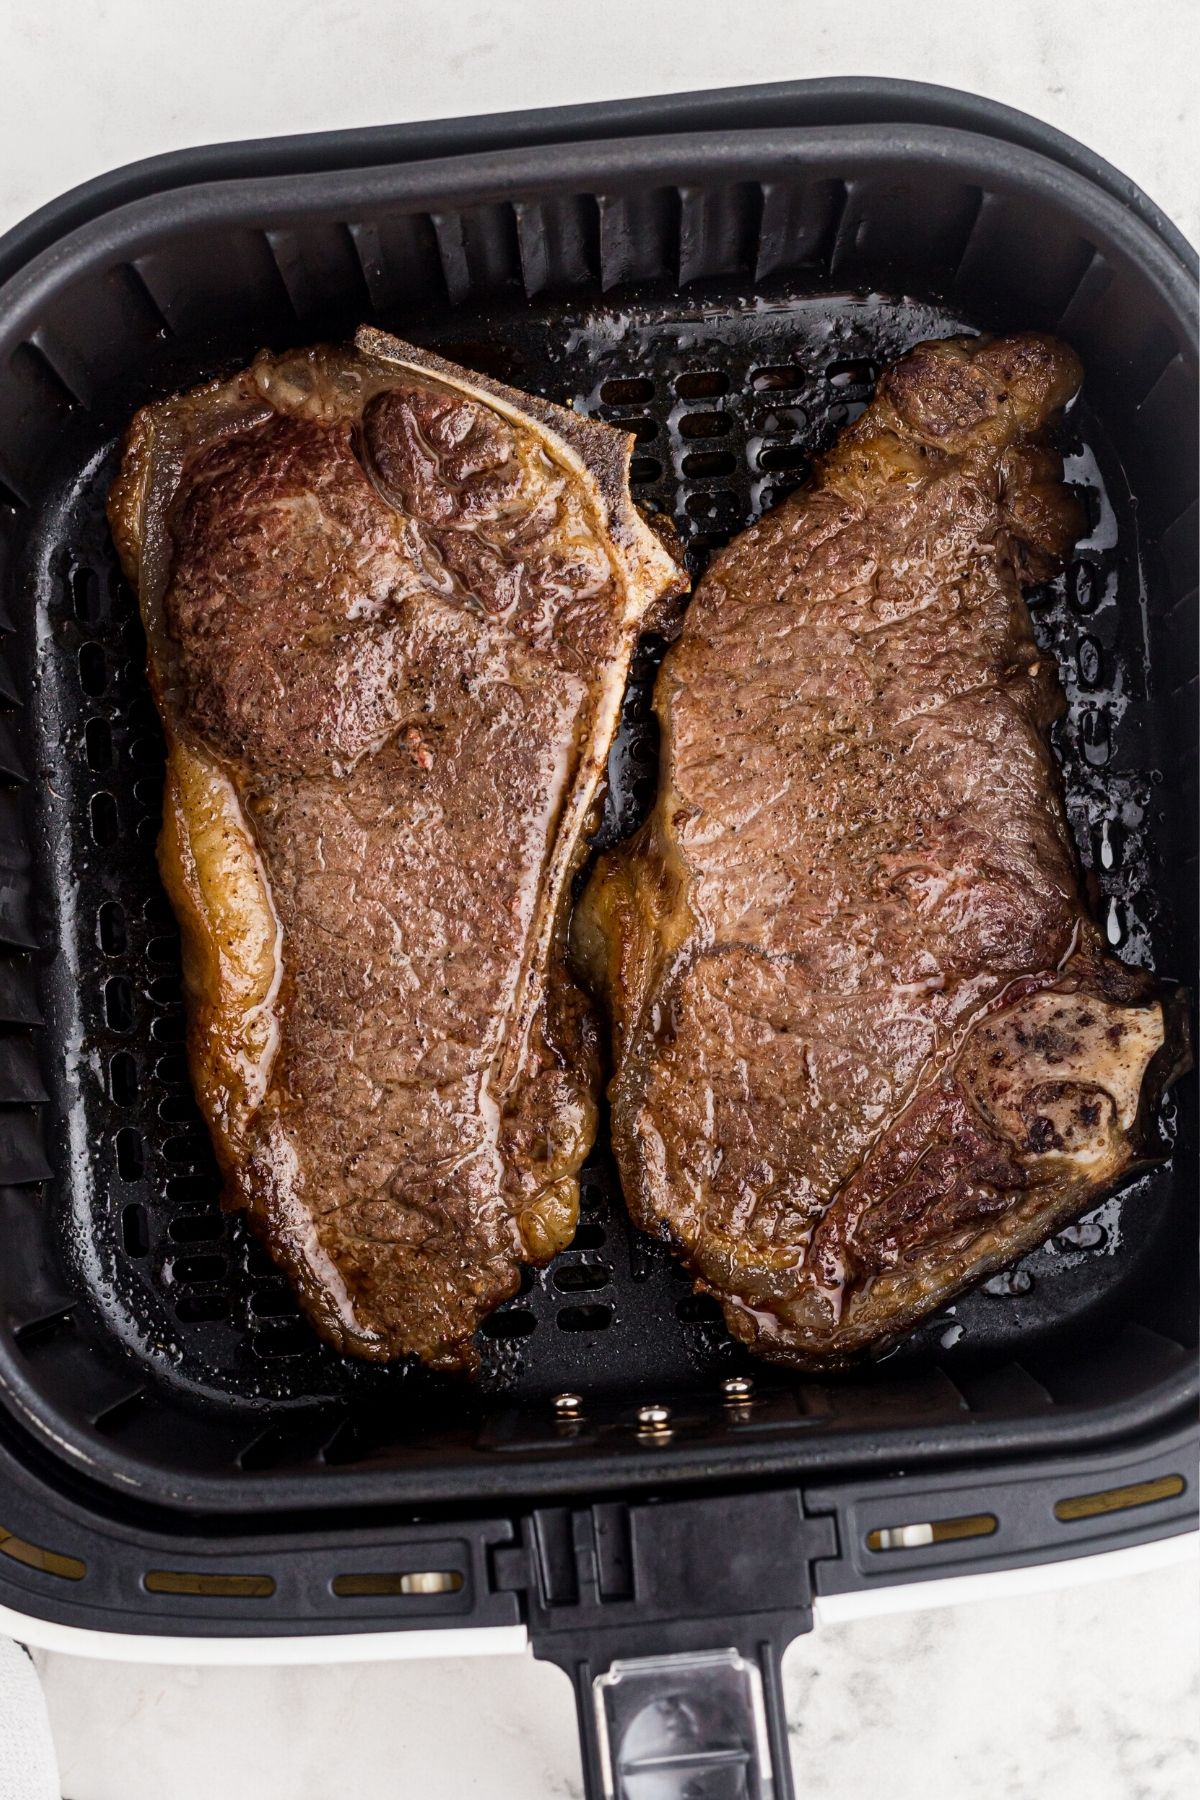 Juicy cooked steaks in the air fryer basket after being cooked